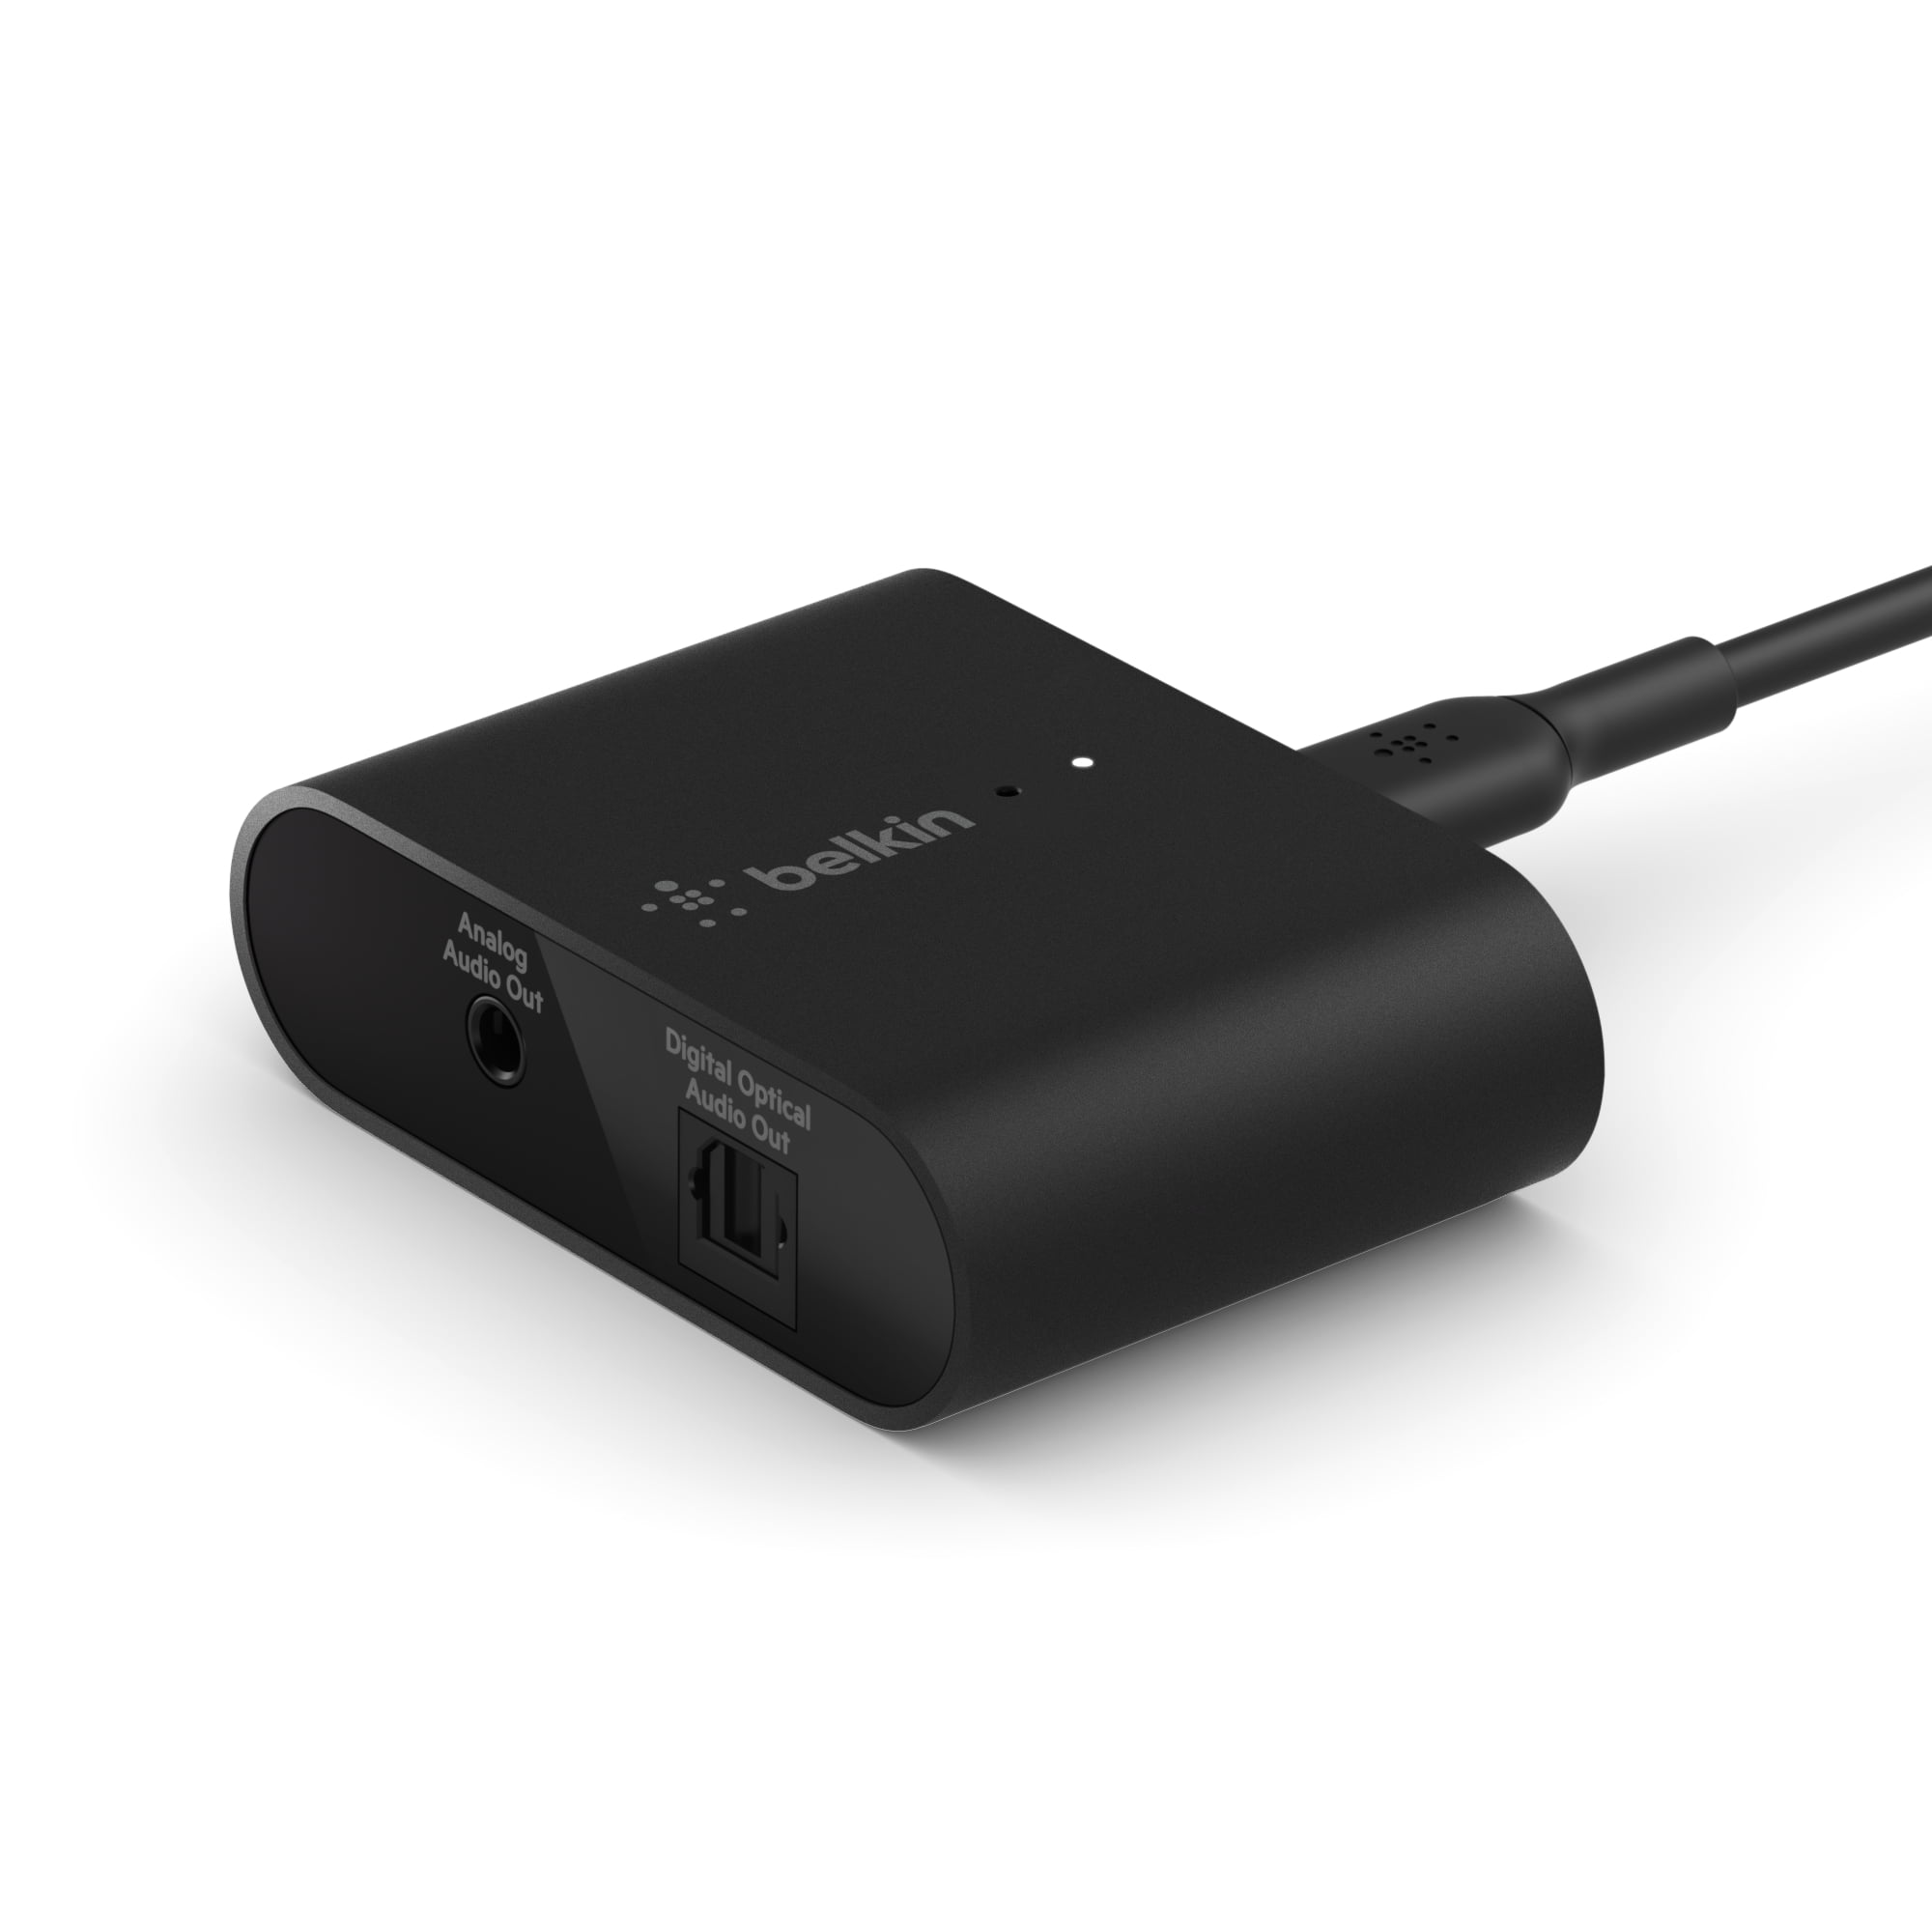 Belkin SOUNDFORM Connect Adapter with AirPlay 2, USB-C to USB-A, Black - Walmart.com